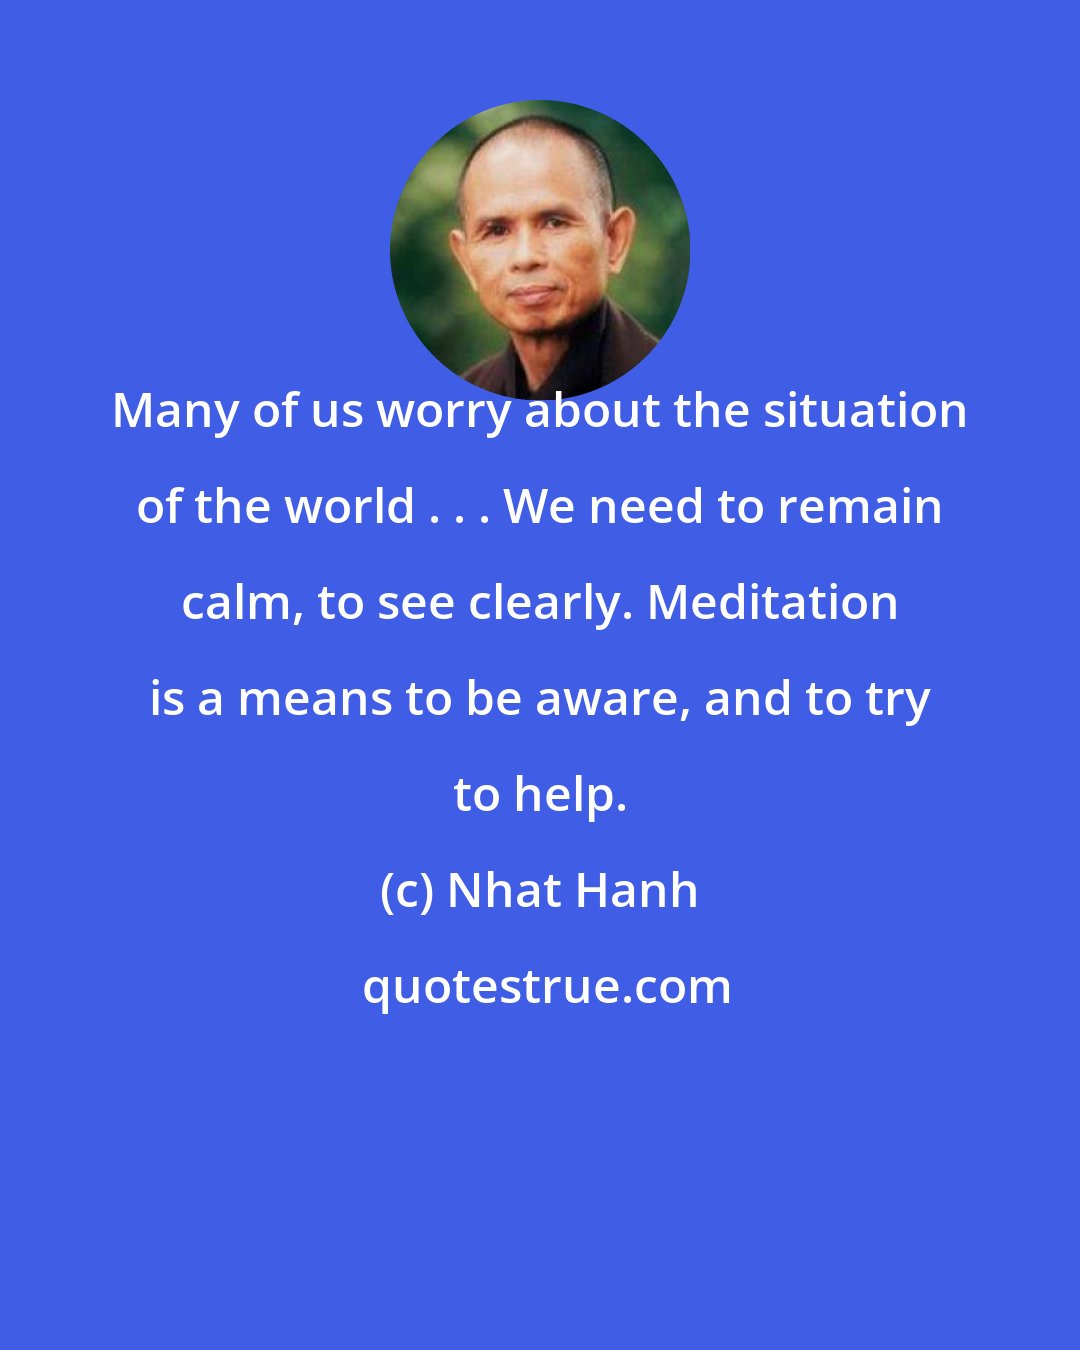 Nhat Hanh: Many of us worry about the situation of the world . . . We need to remain calm, to see clearly. Meditation is a means to be aware, and to try to help.